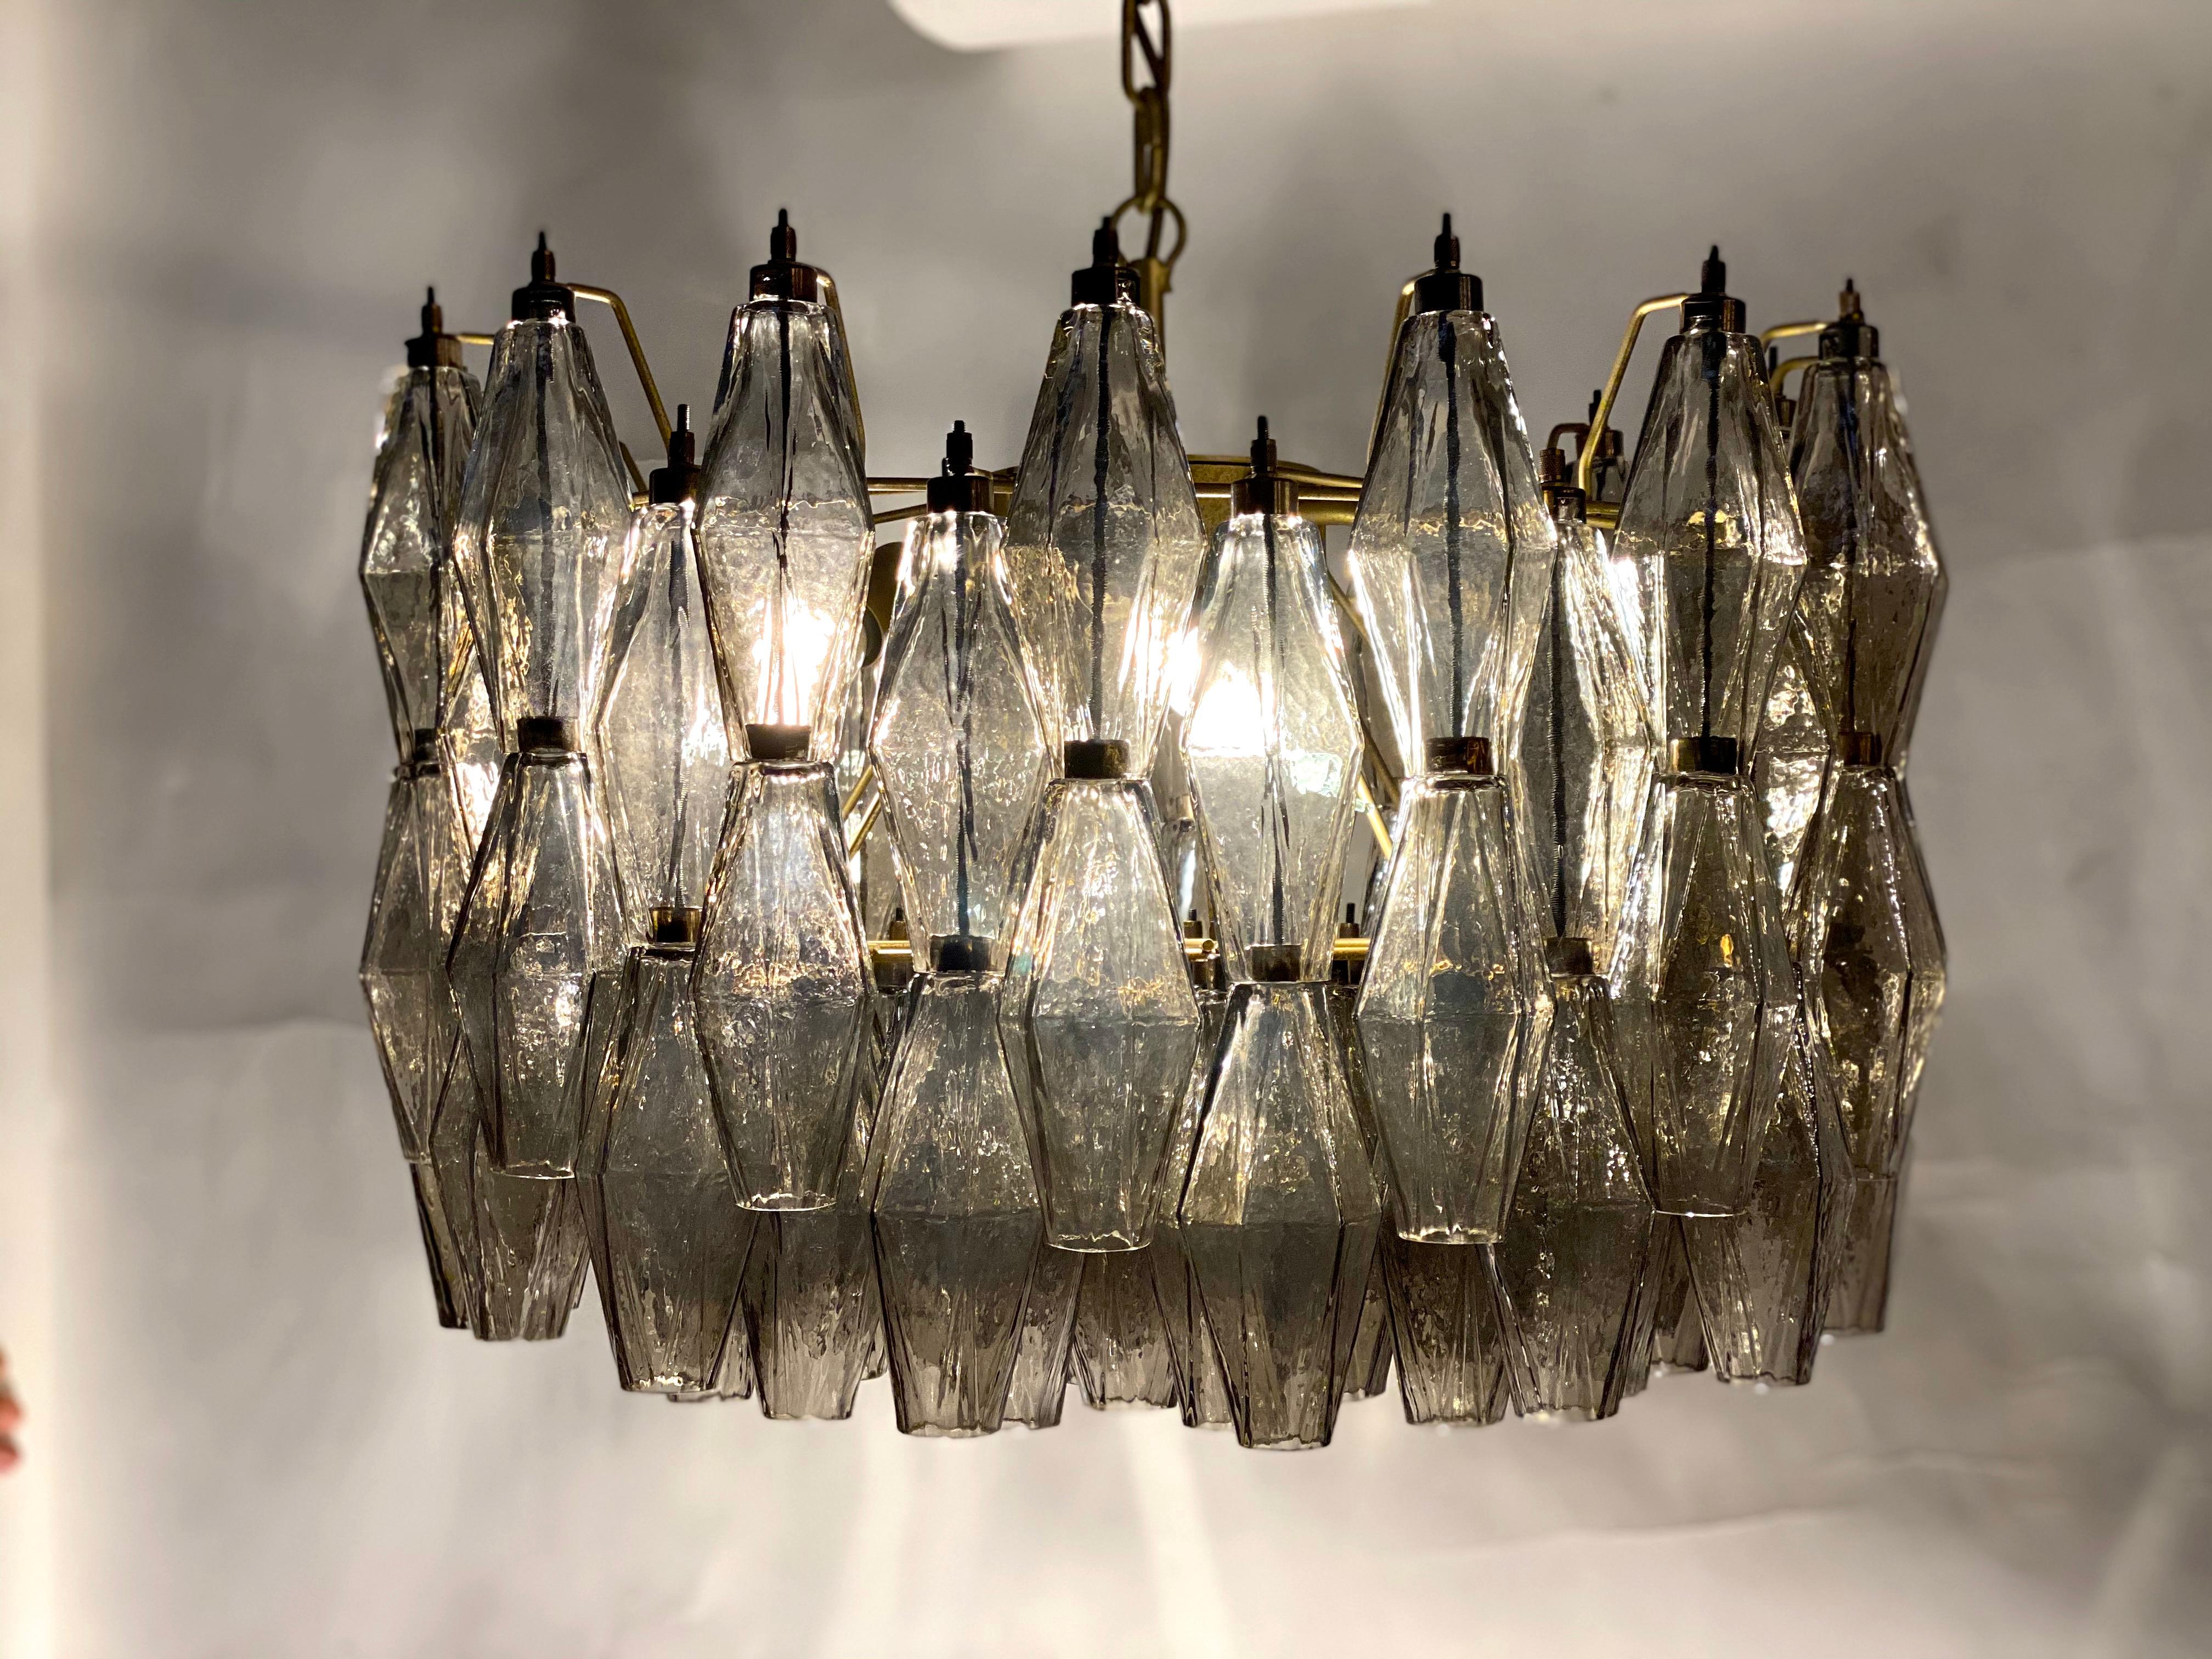 Pair of Grey Poliedri Murano Glass Chandeliers in Carlo Scarpa Style For Sale 10